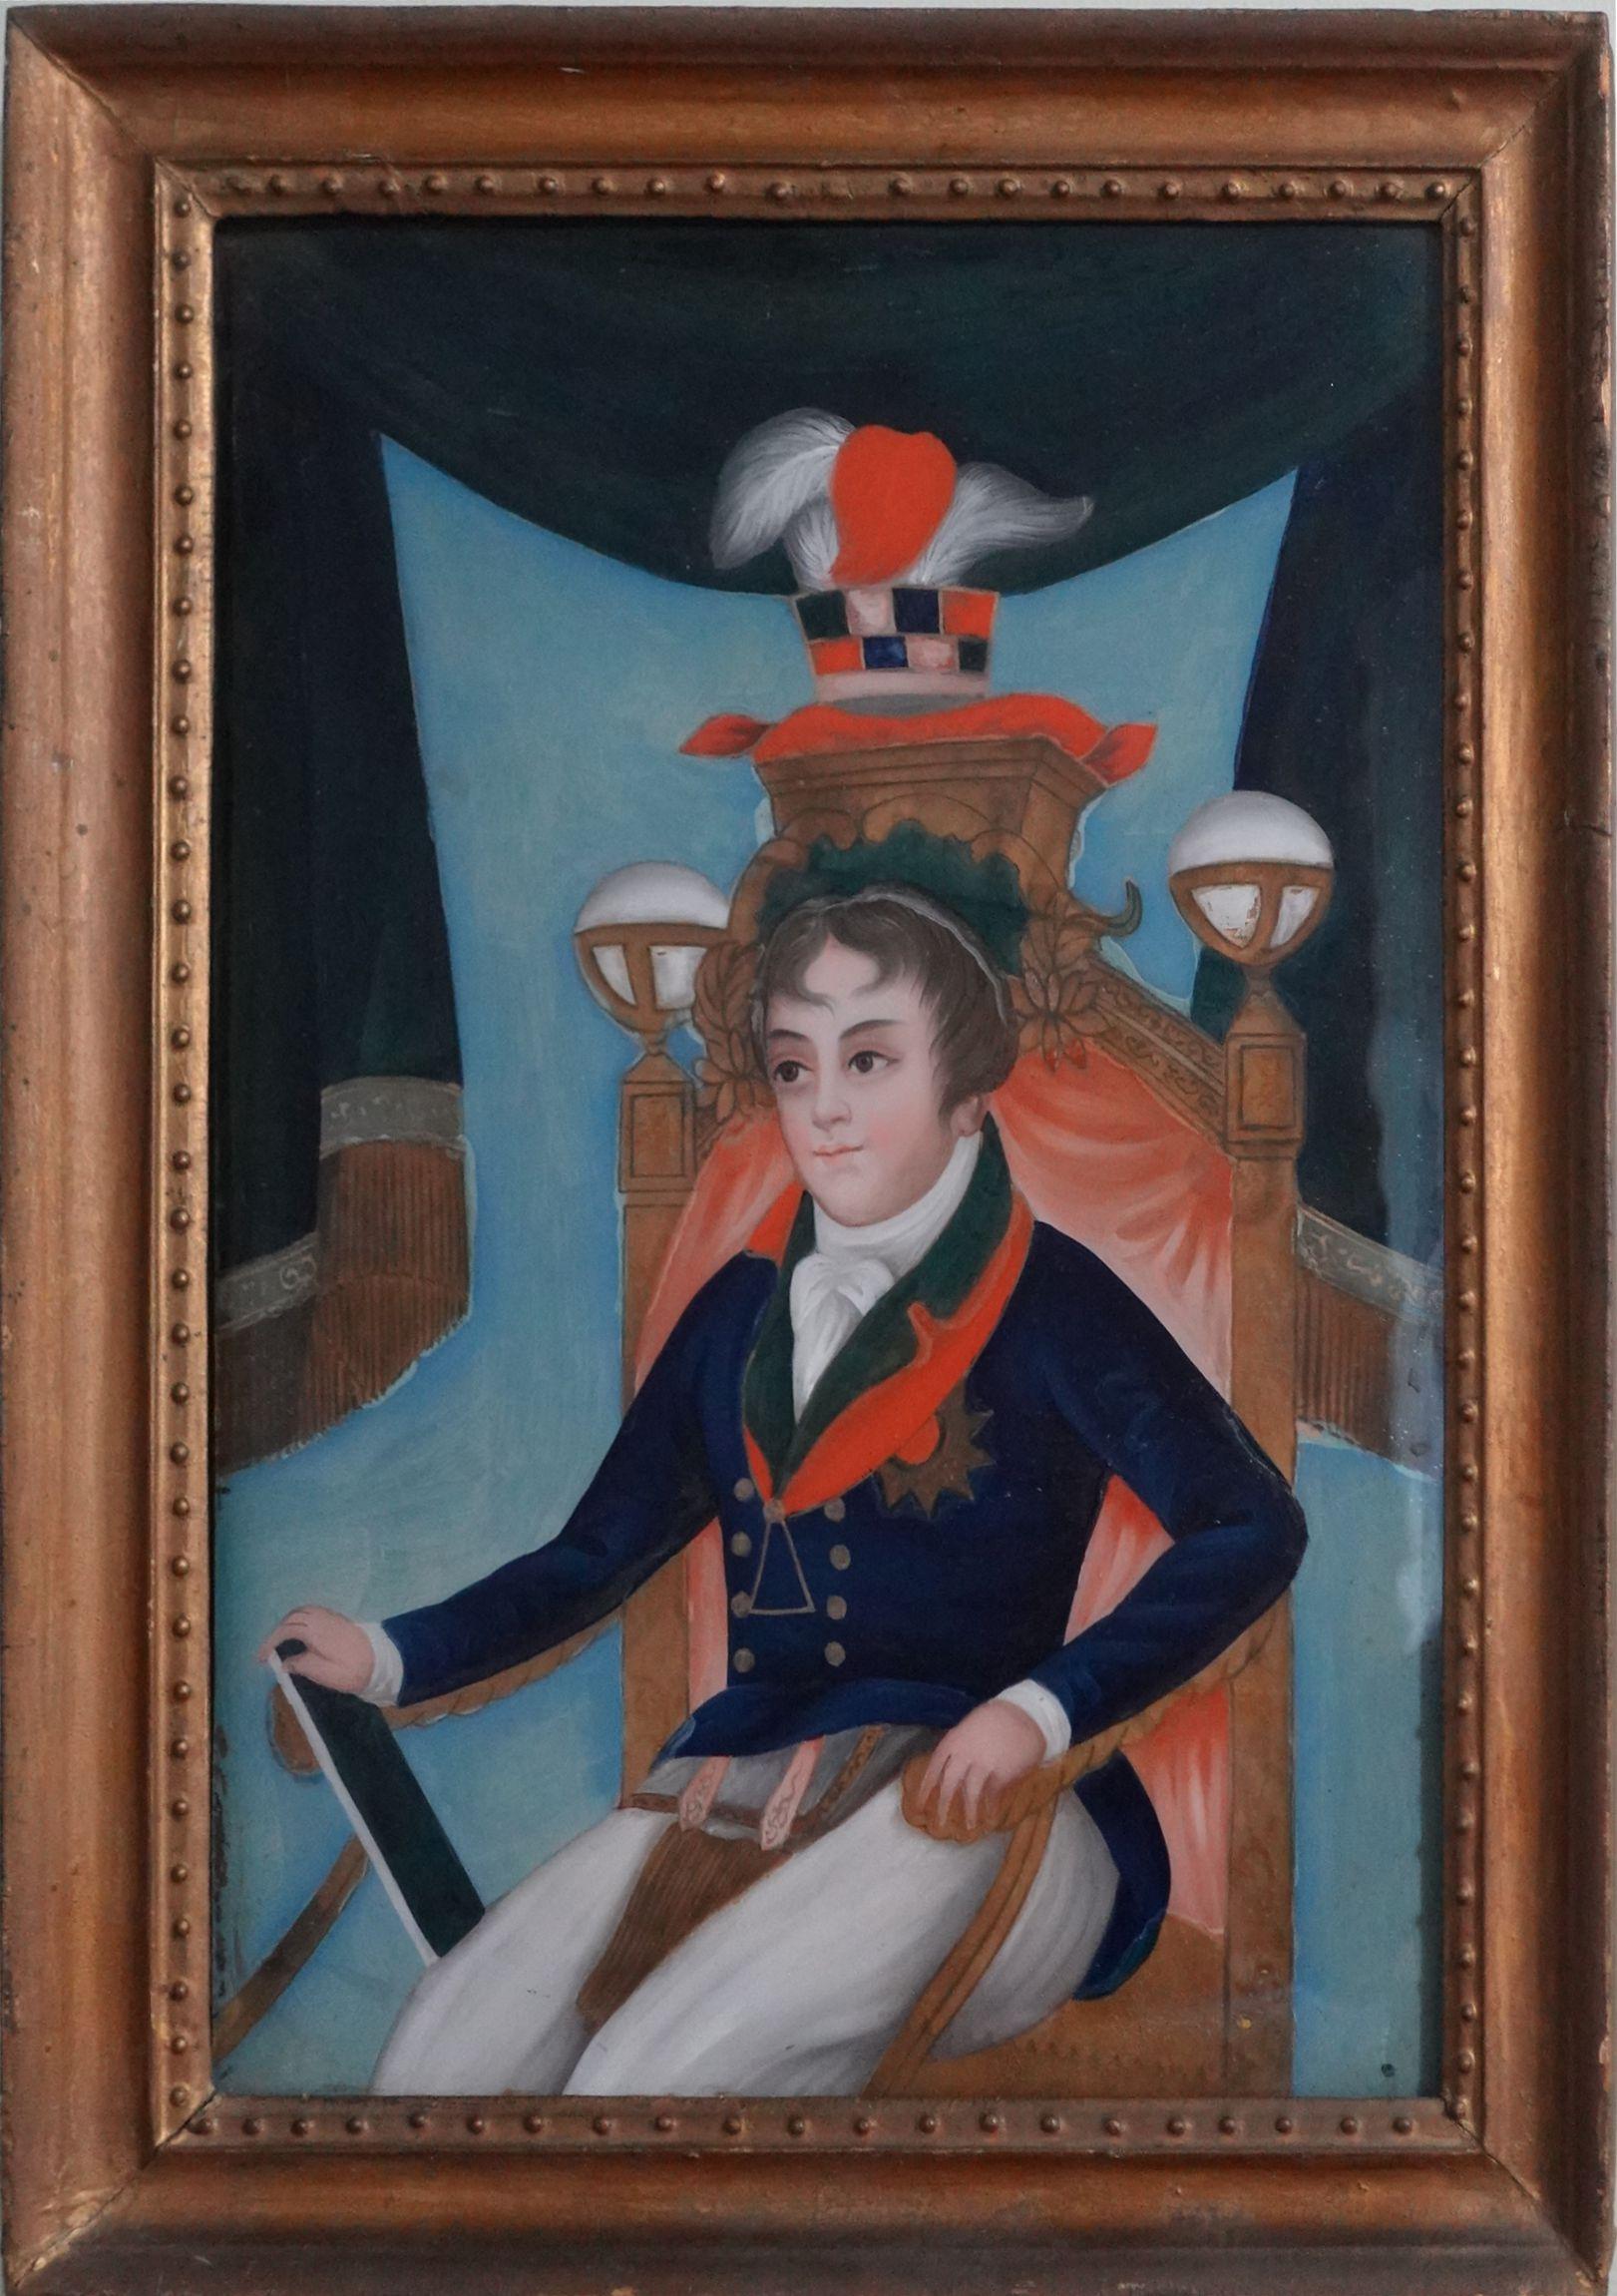 Chinese Export Reverse Glass Painting, 19th century
portrait of a young Napoleon Bonaparte; 13 1/2 x 9 1/2 in., frame 16 1/2 x 12 1/4 in.

Reverse glass pictures became fashionable in the 18th century. Glass panels were sent from Europe to China by